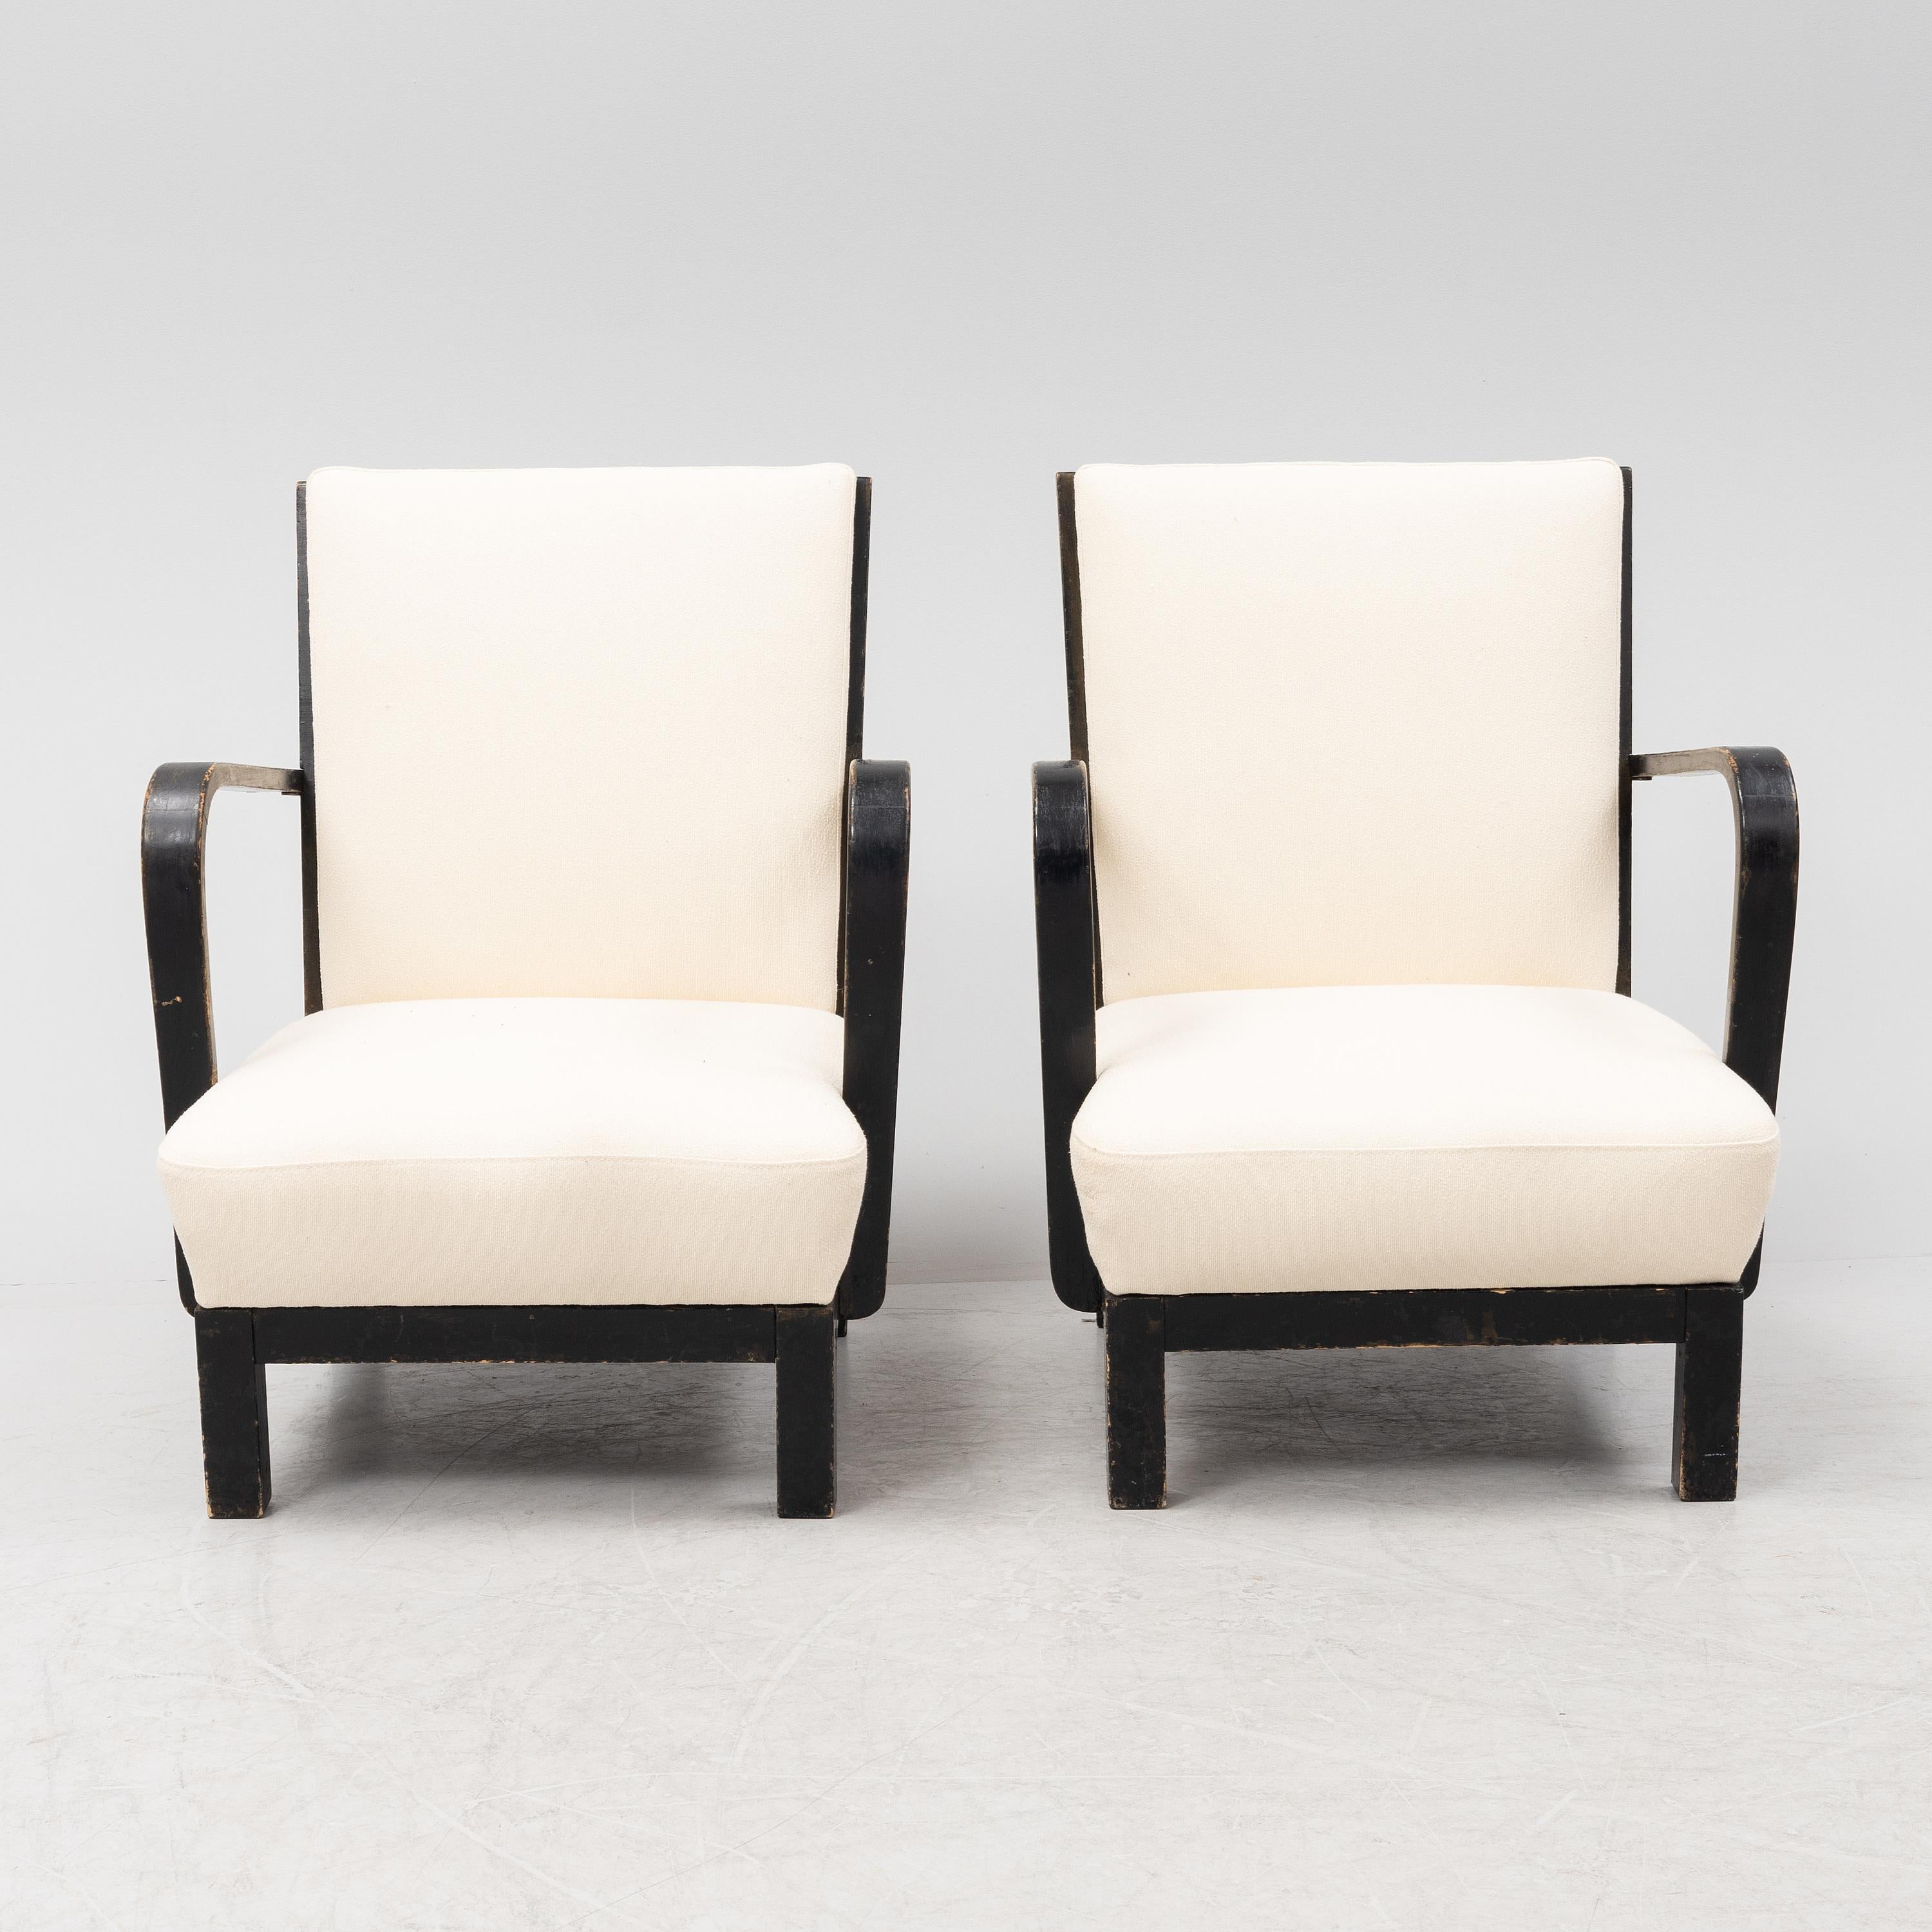 Scandinave moderne Art Deco Finnish Lounge Chairs, Ivory Boucle, Made by Asko, Finland 1935 en vente